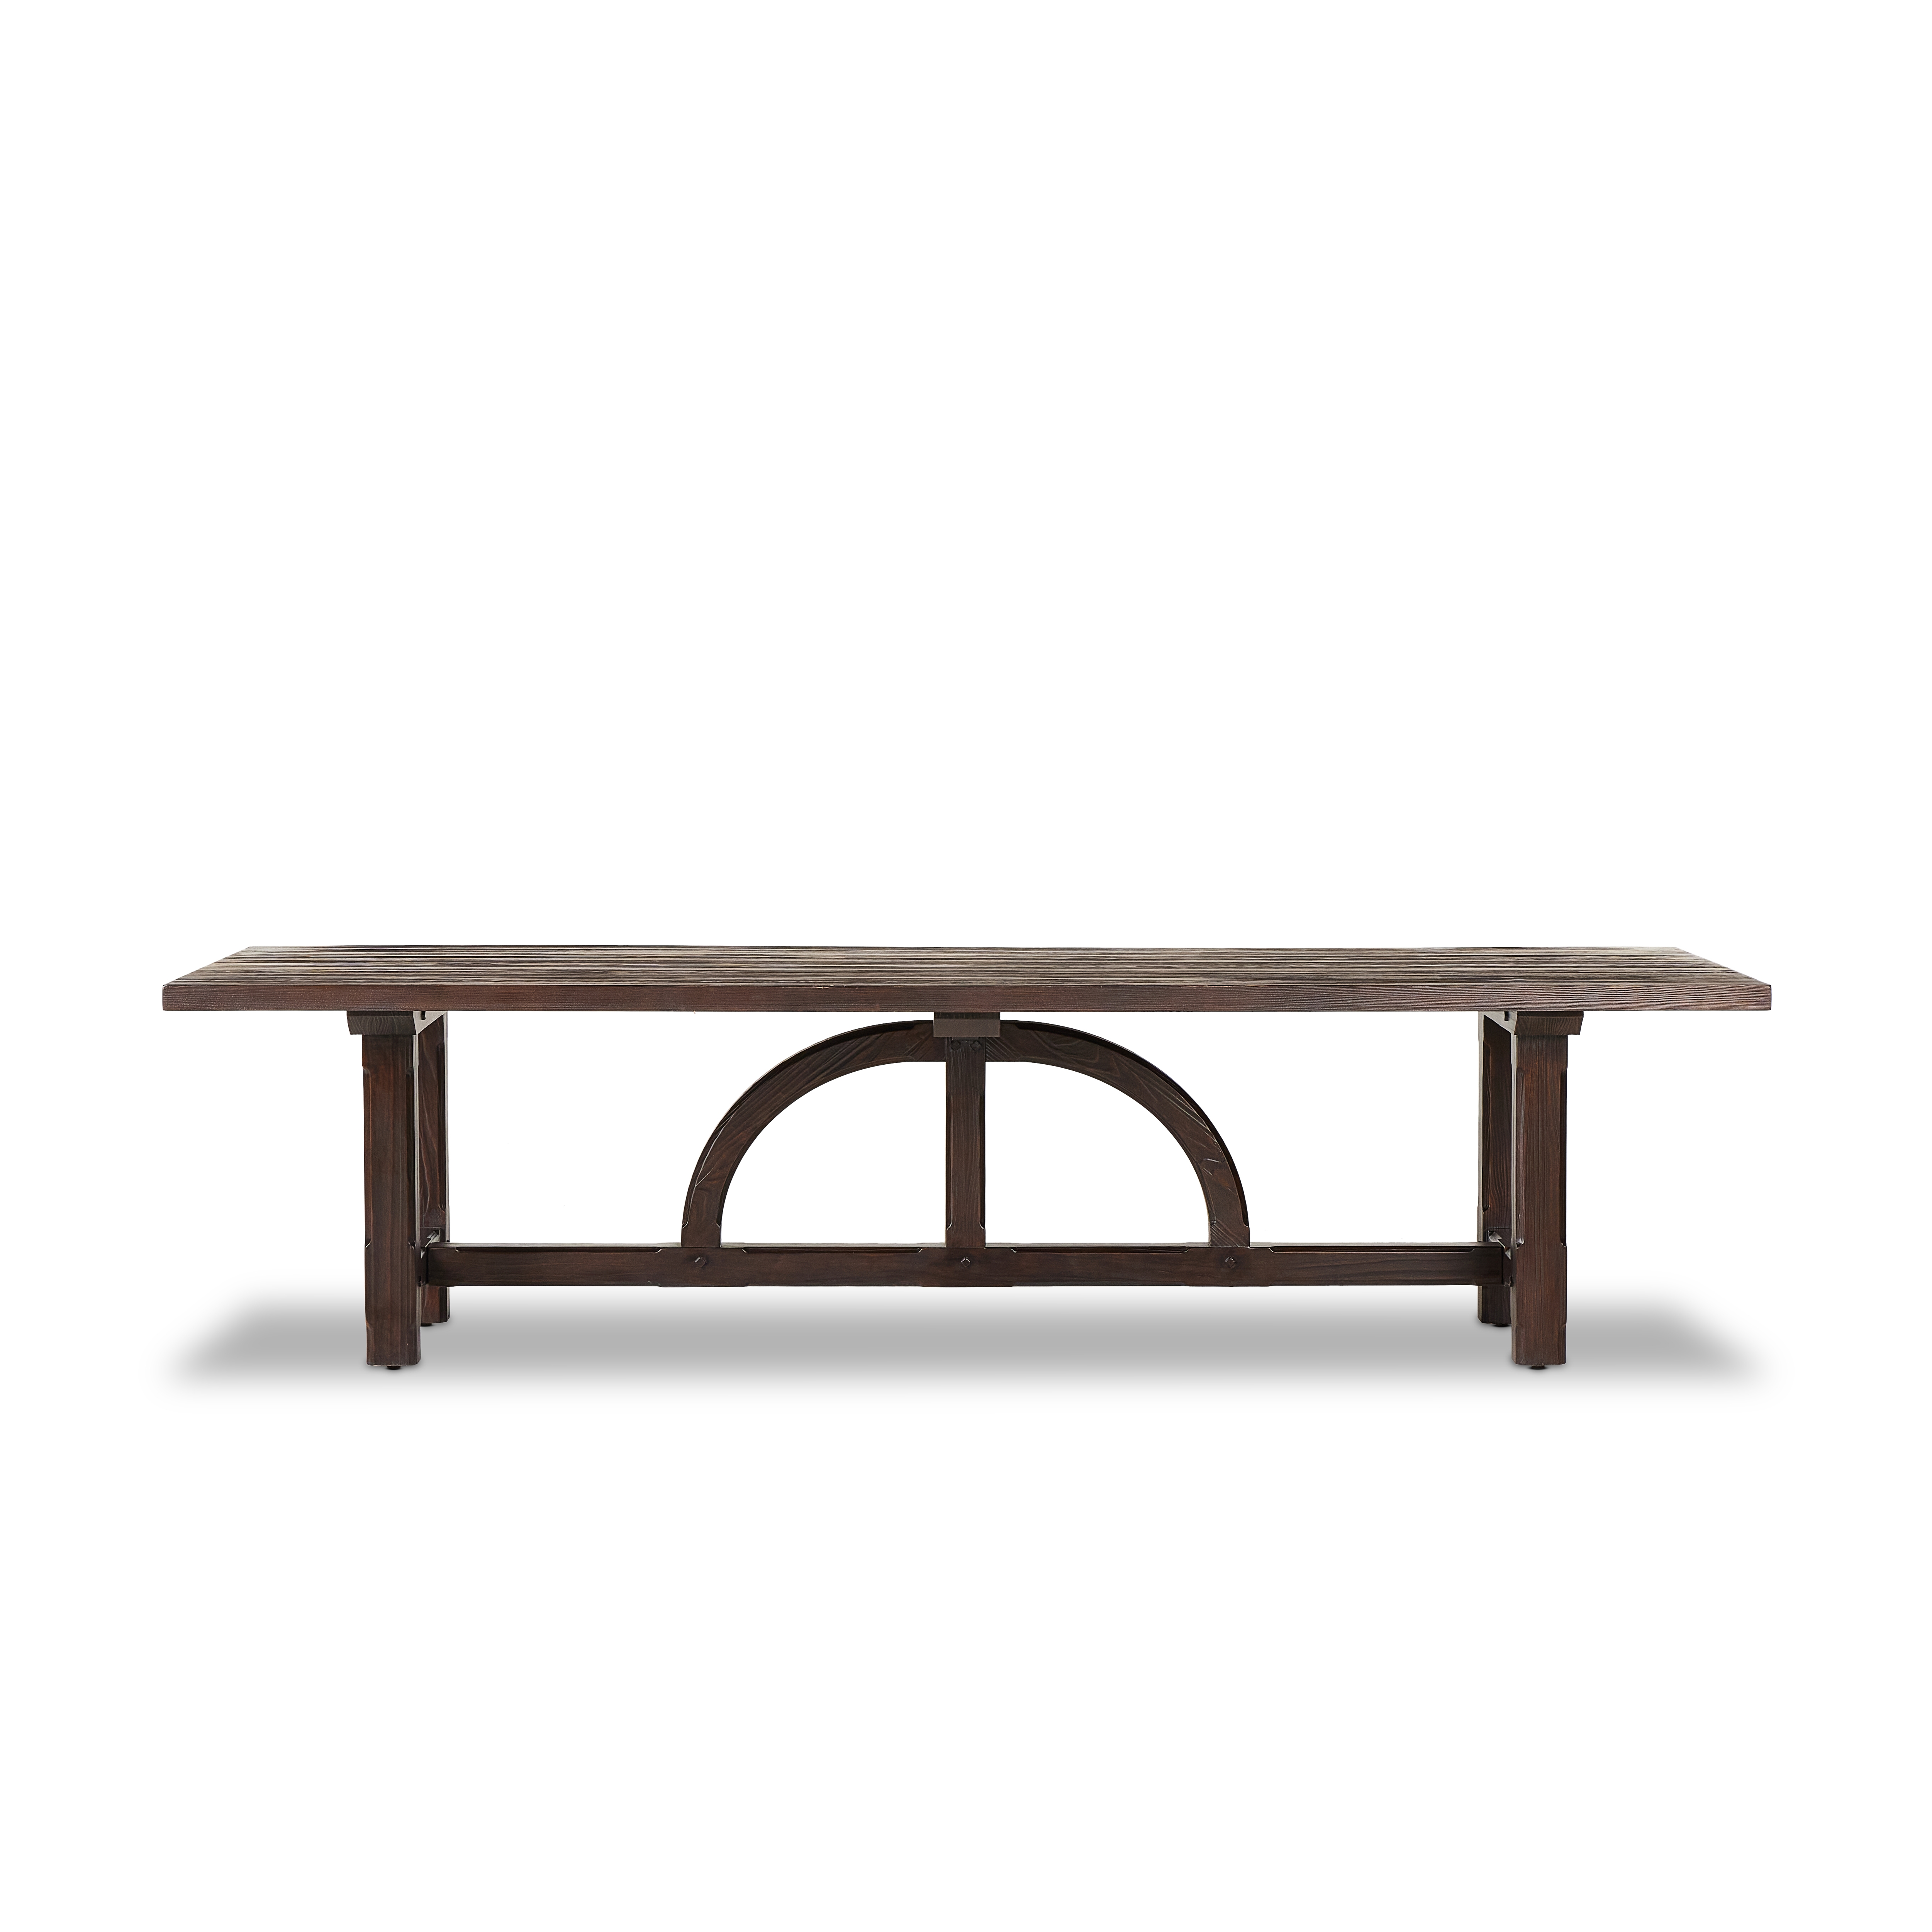 The Arch Dining Table-Medium Brown Fir - Image 2